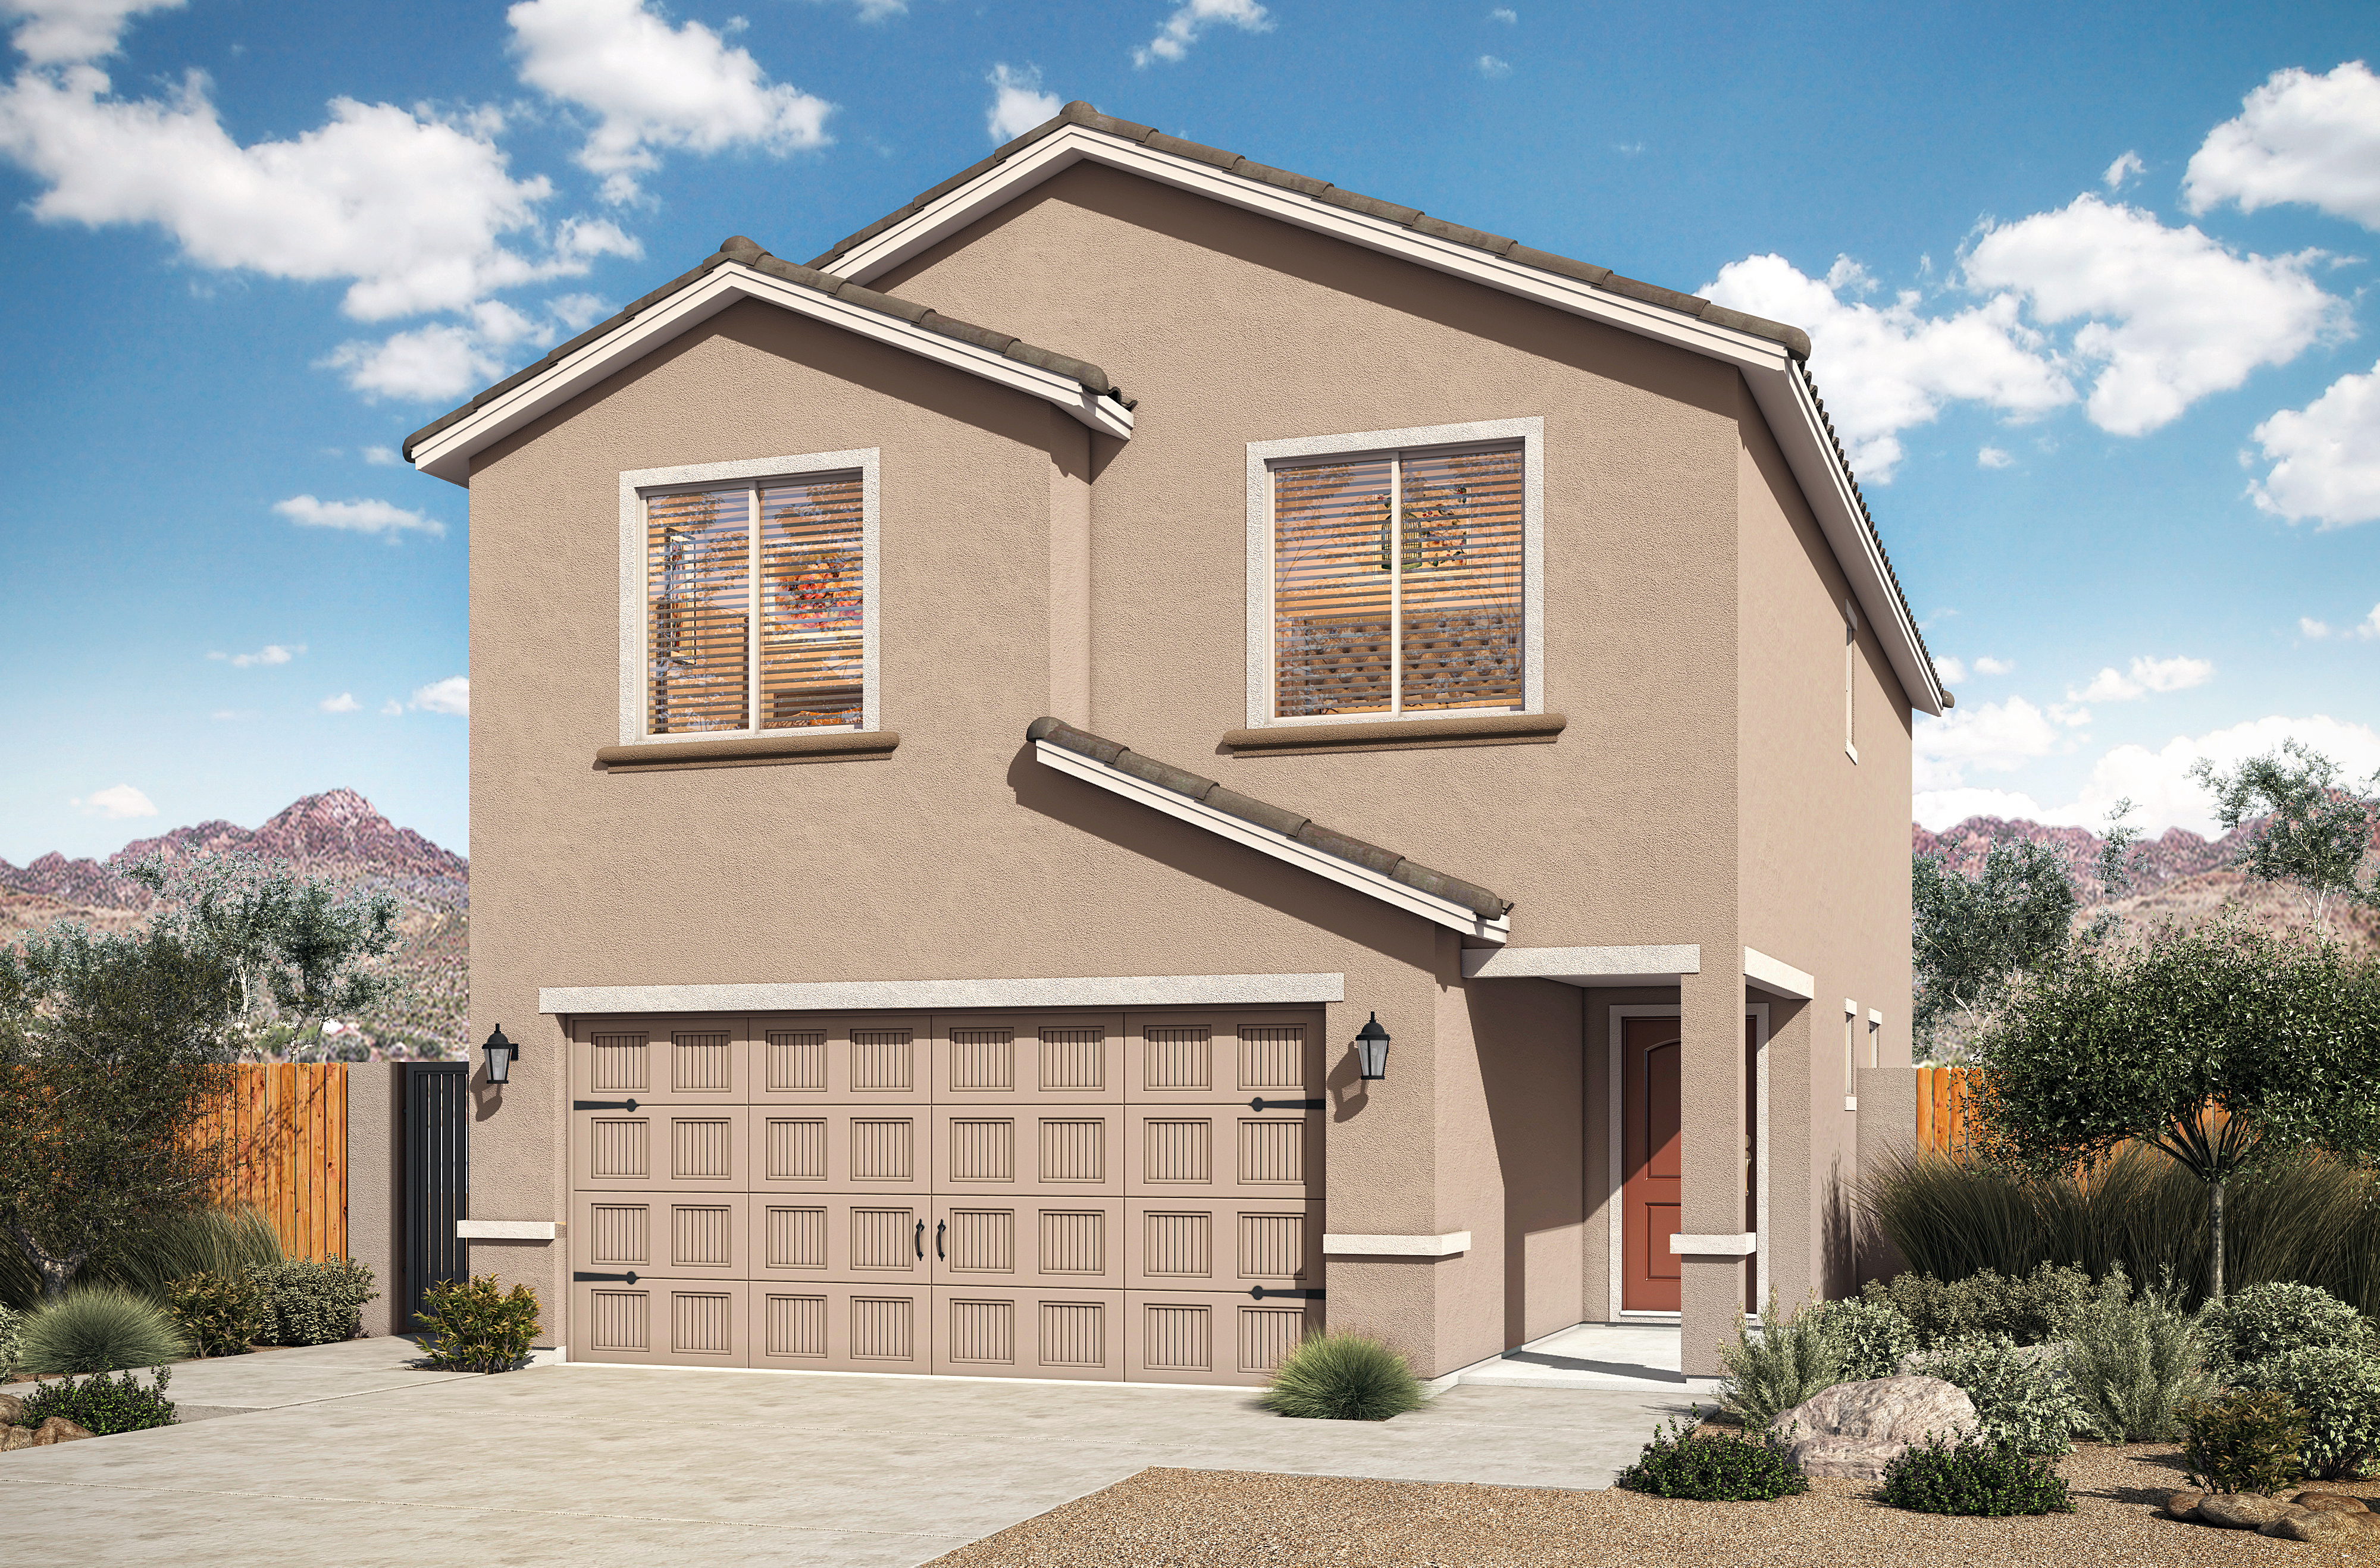 Skyline is now open for sale with two-story homes ranging from three to four bedrooms.